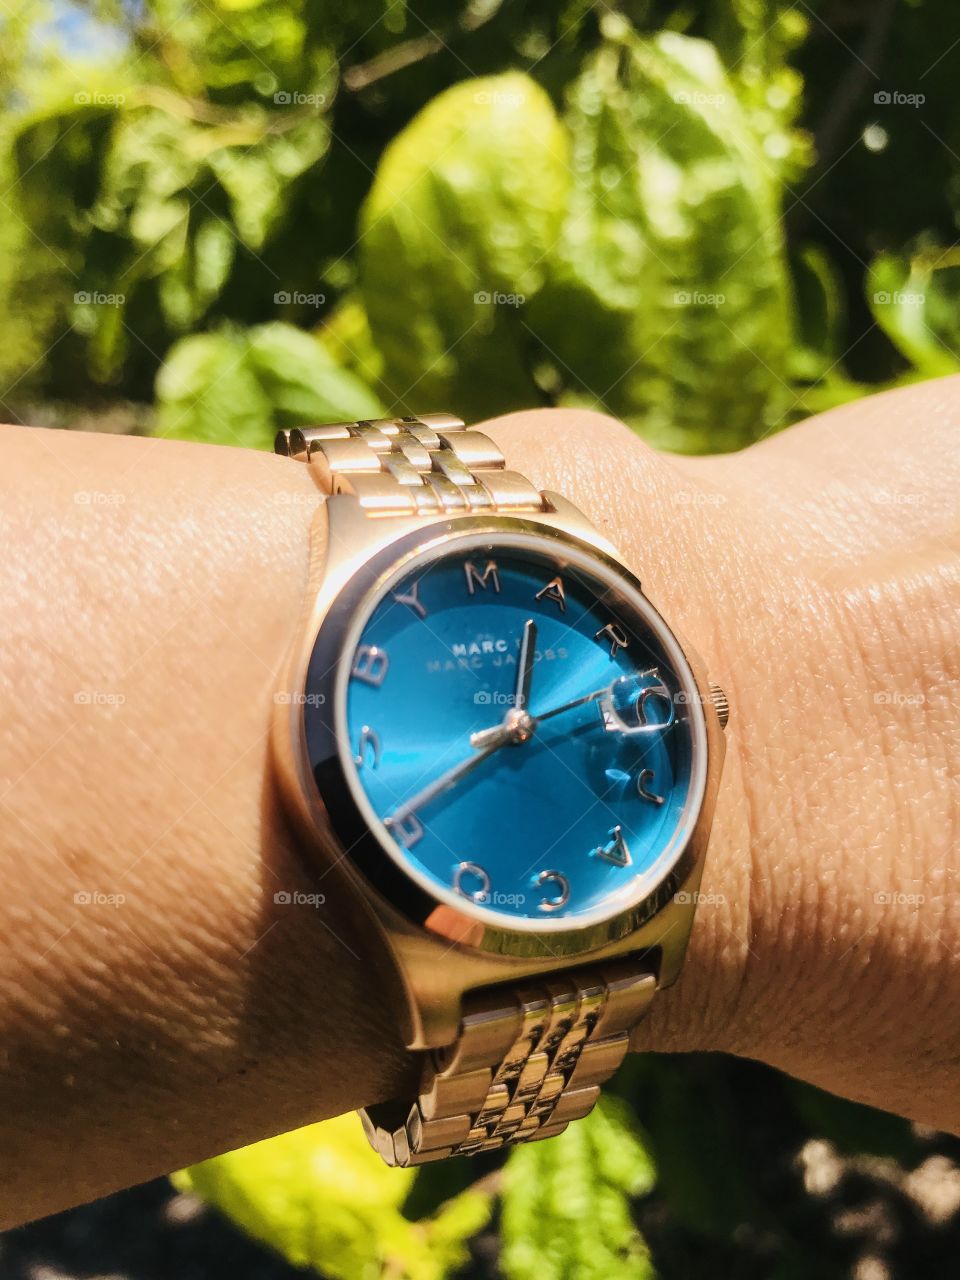 Model watch for woman Marc by Marc Jacobs water resistant 5ATM all stainless steel MBM3324 251407 photo taken at the park CHELTENHAM Melbourne Australia 